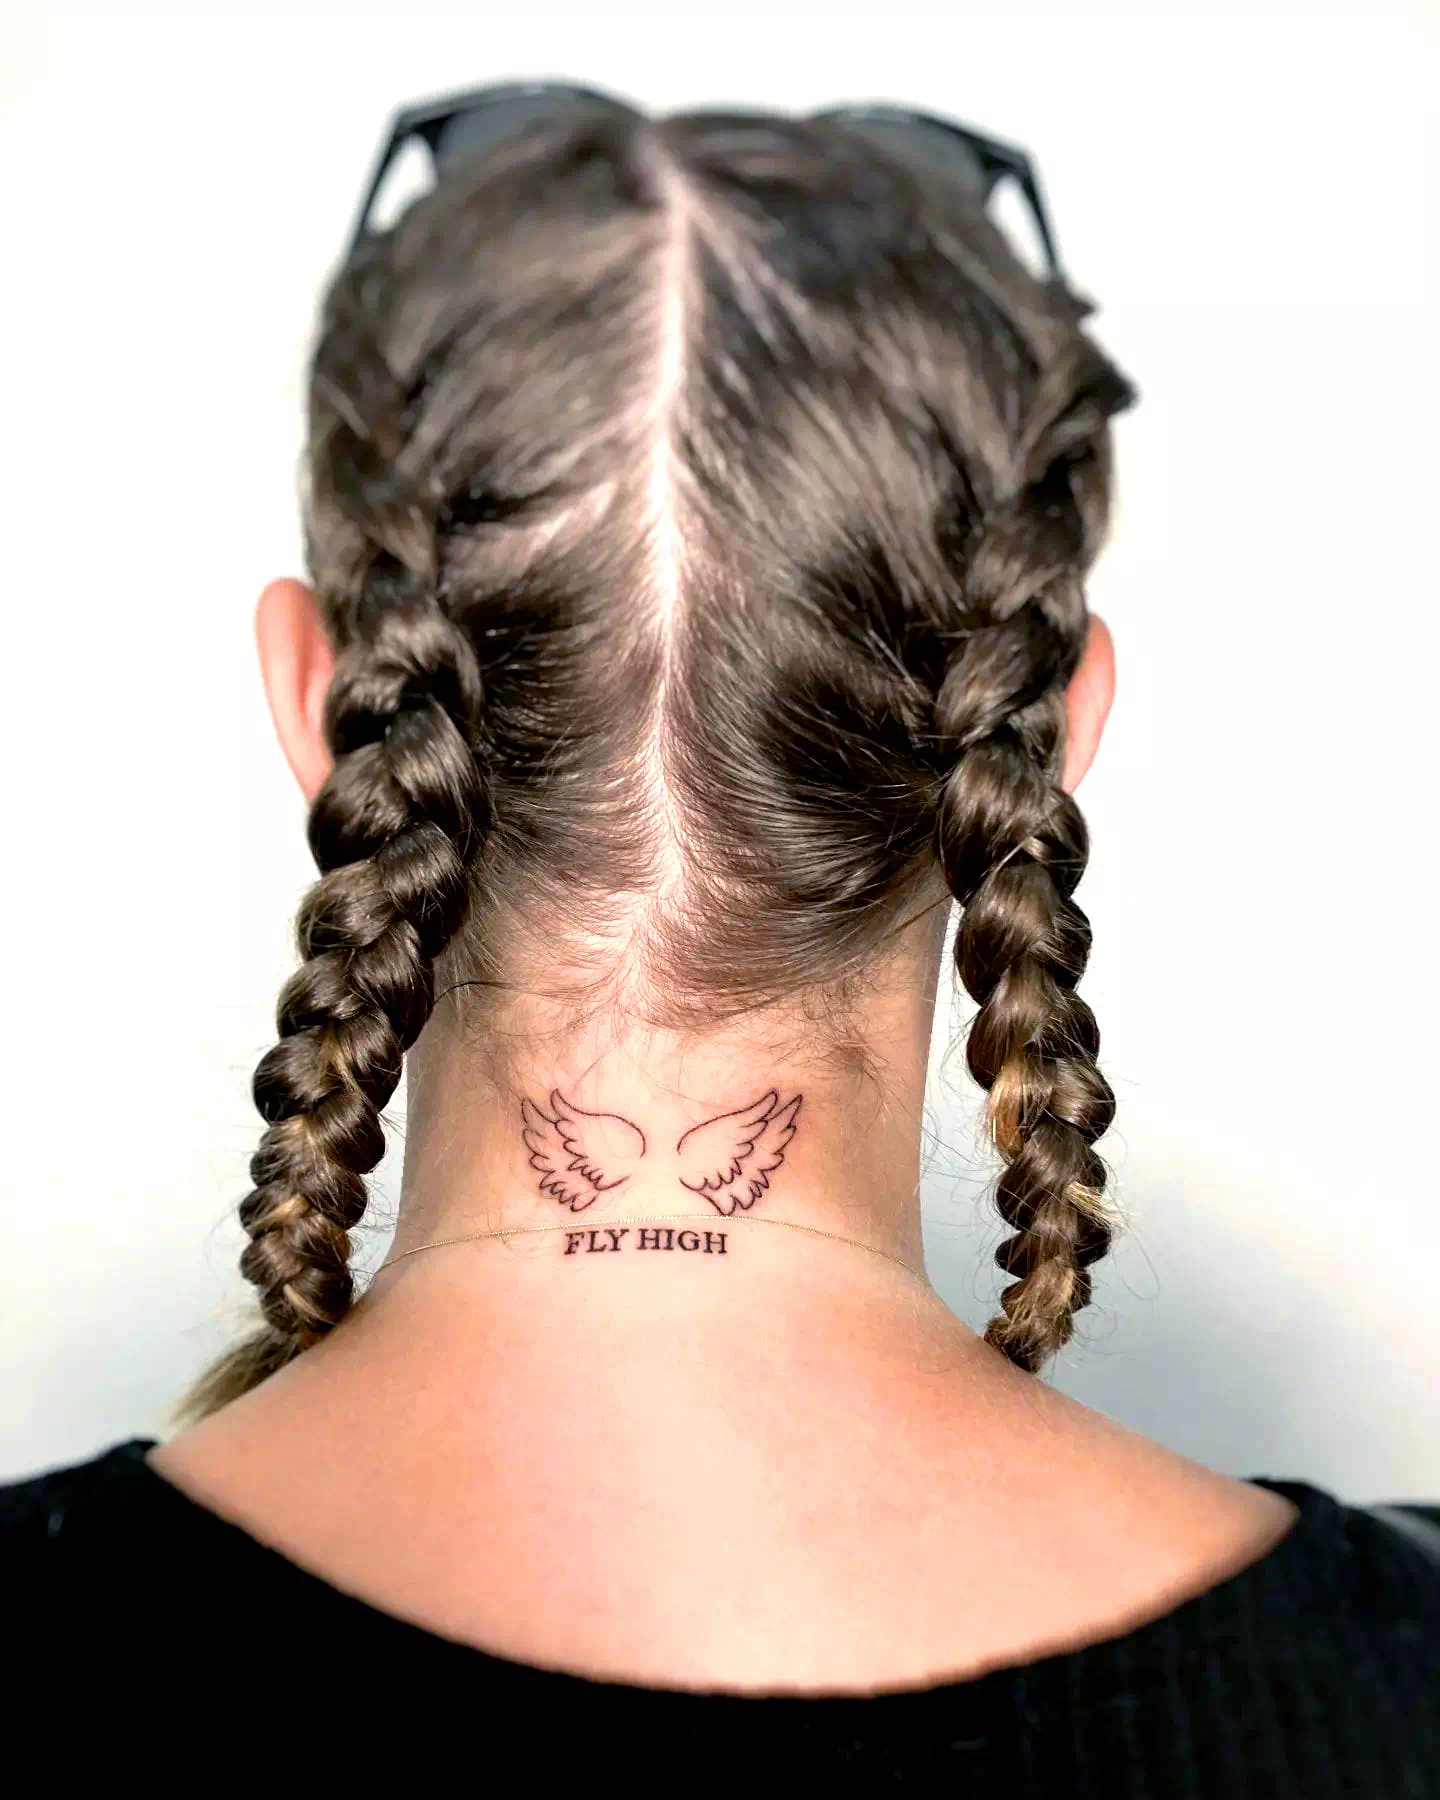 Wings neck tattoo 4